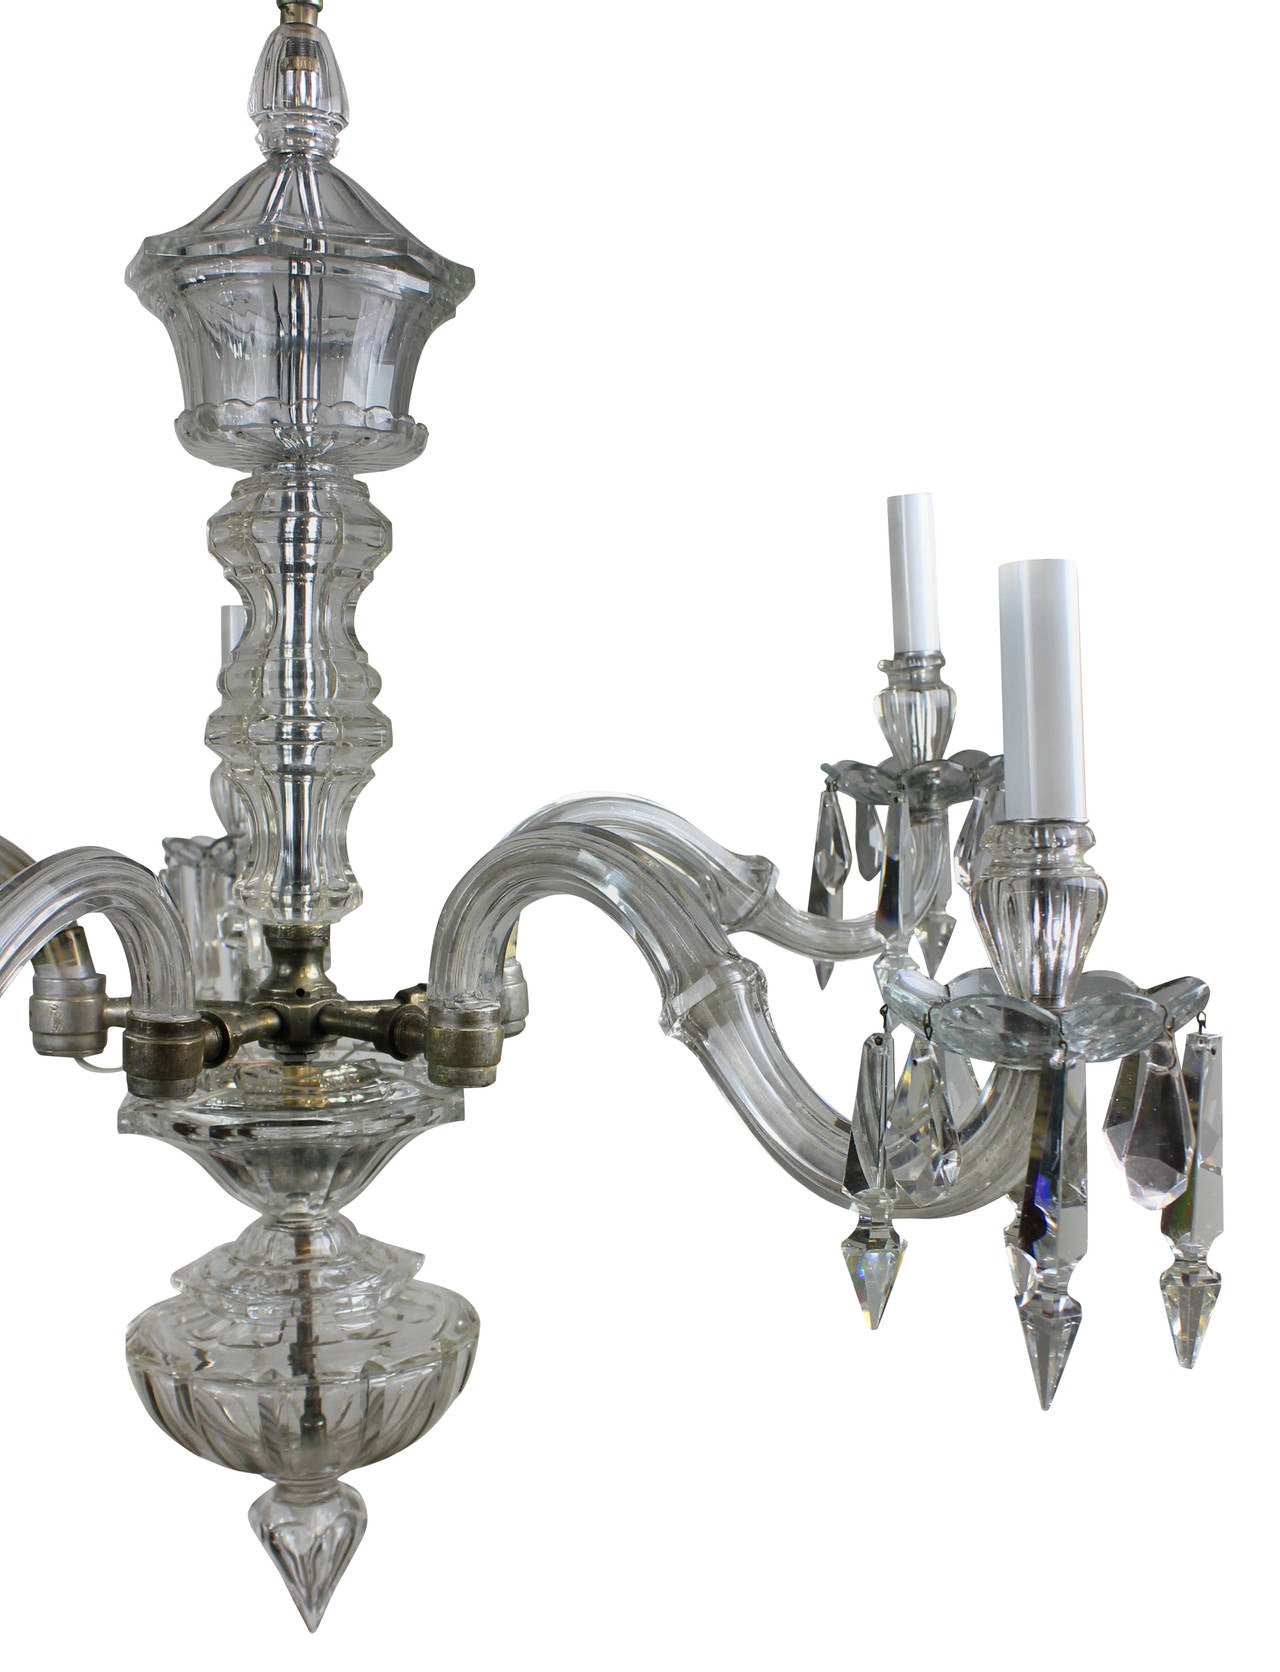 A small English cut glass chandelier in cut glass with central stem, generous fluted bowl and pendant drops. Formerly a gasolier.

 